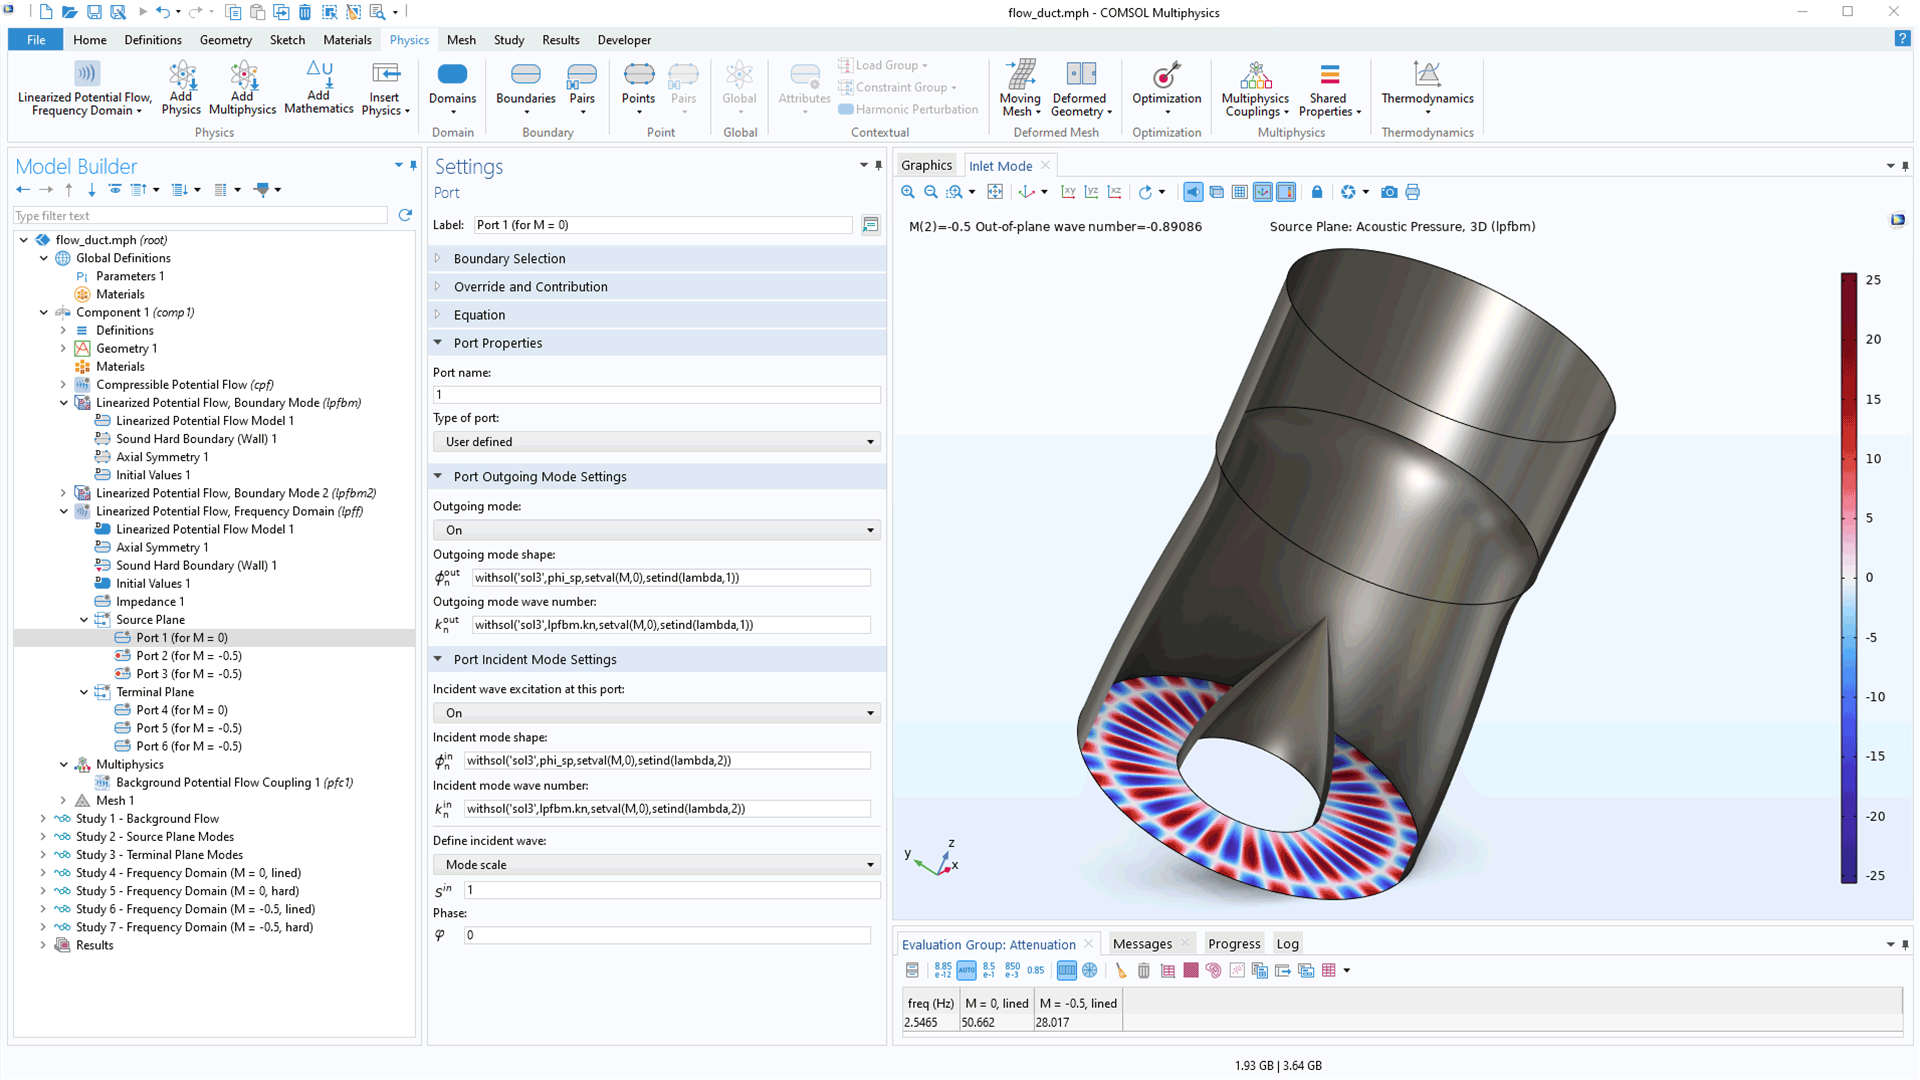 The COMSOL Multiphysics UI showing the Model Builder with a Port node highlighted, the corresponding Settings window, and a turbojet engine flow duct model in the Graphics window.